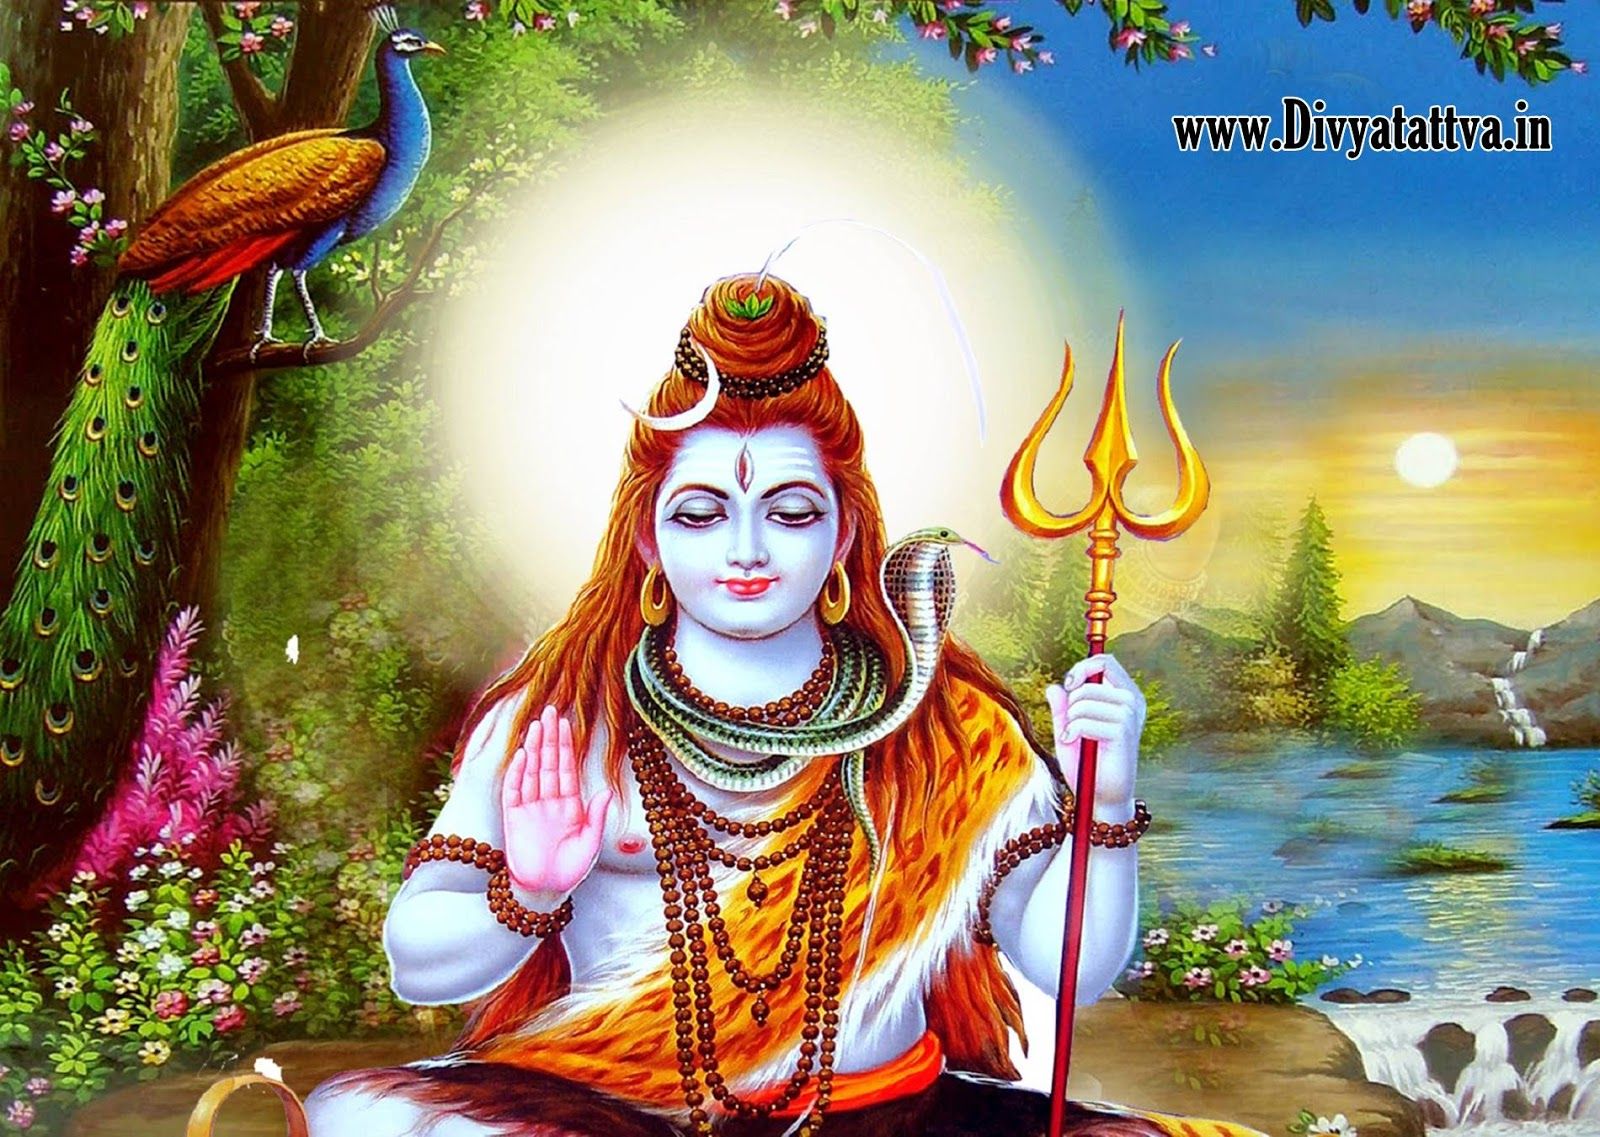 Lord Shiva Parvati Wallpaper Free Download For Mobile